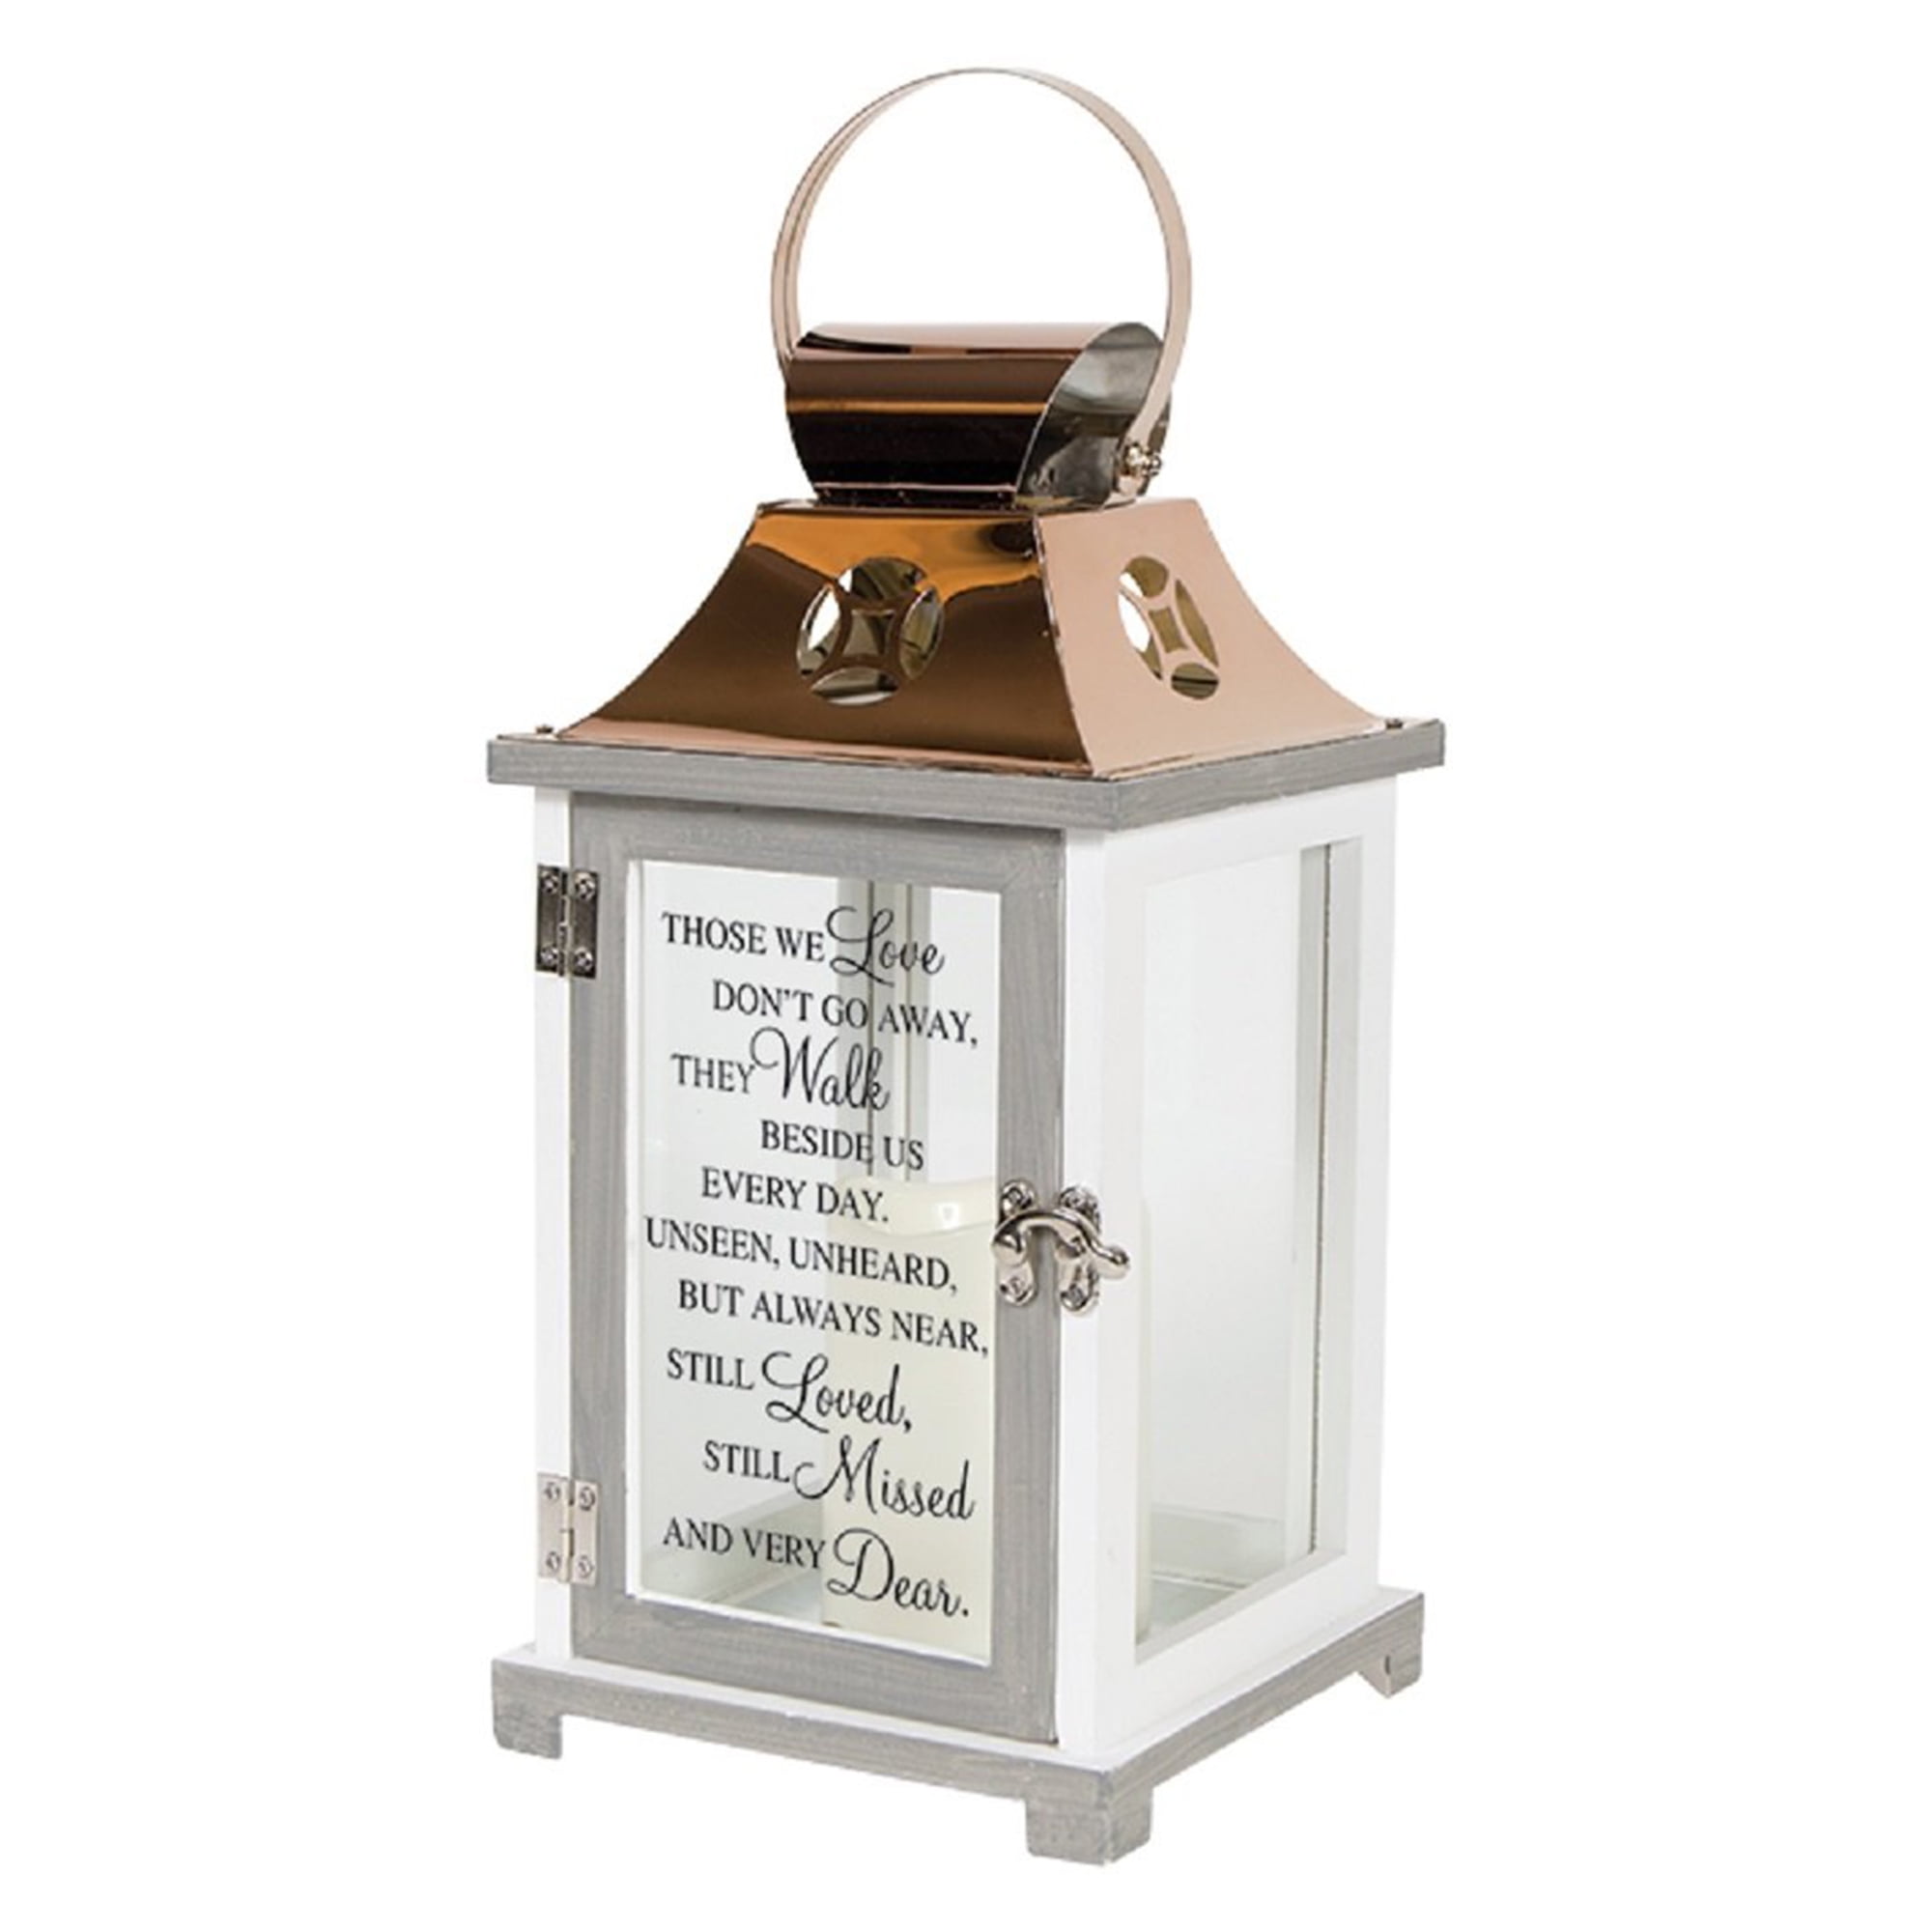 WALK BESIDE US Memorial Candle Lantern 13.5" Tall by Carson 